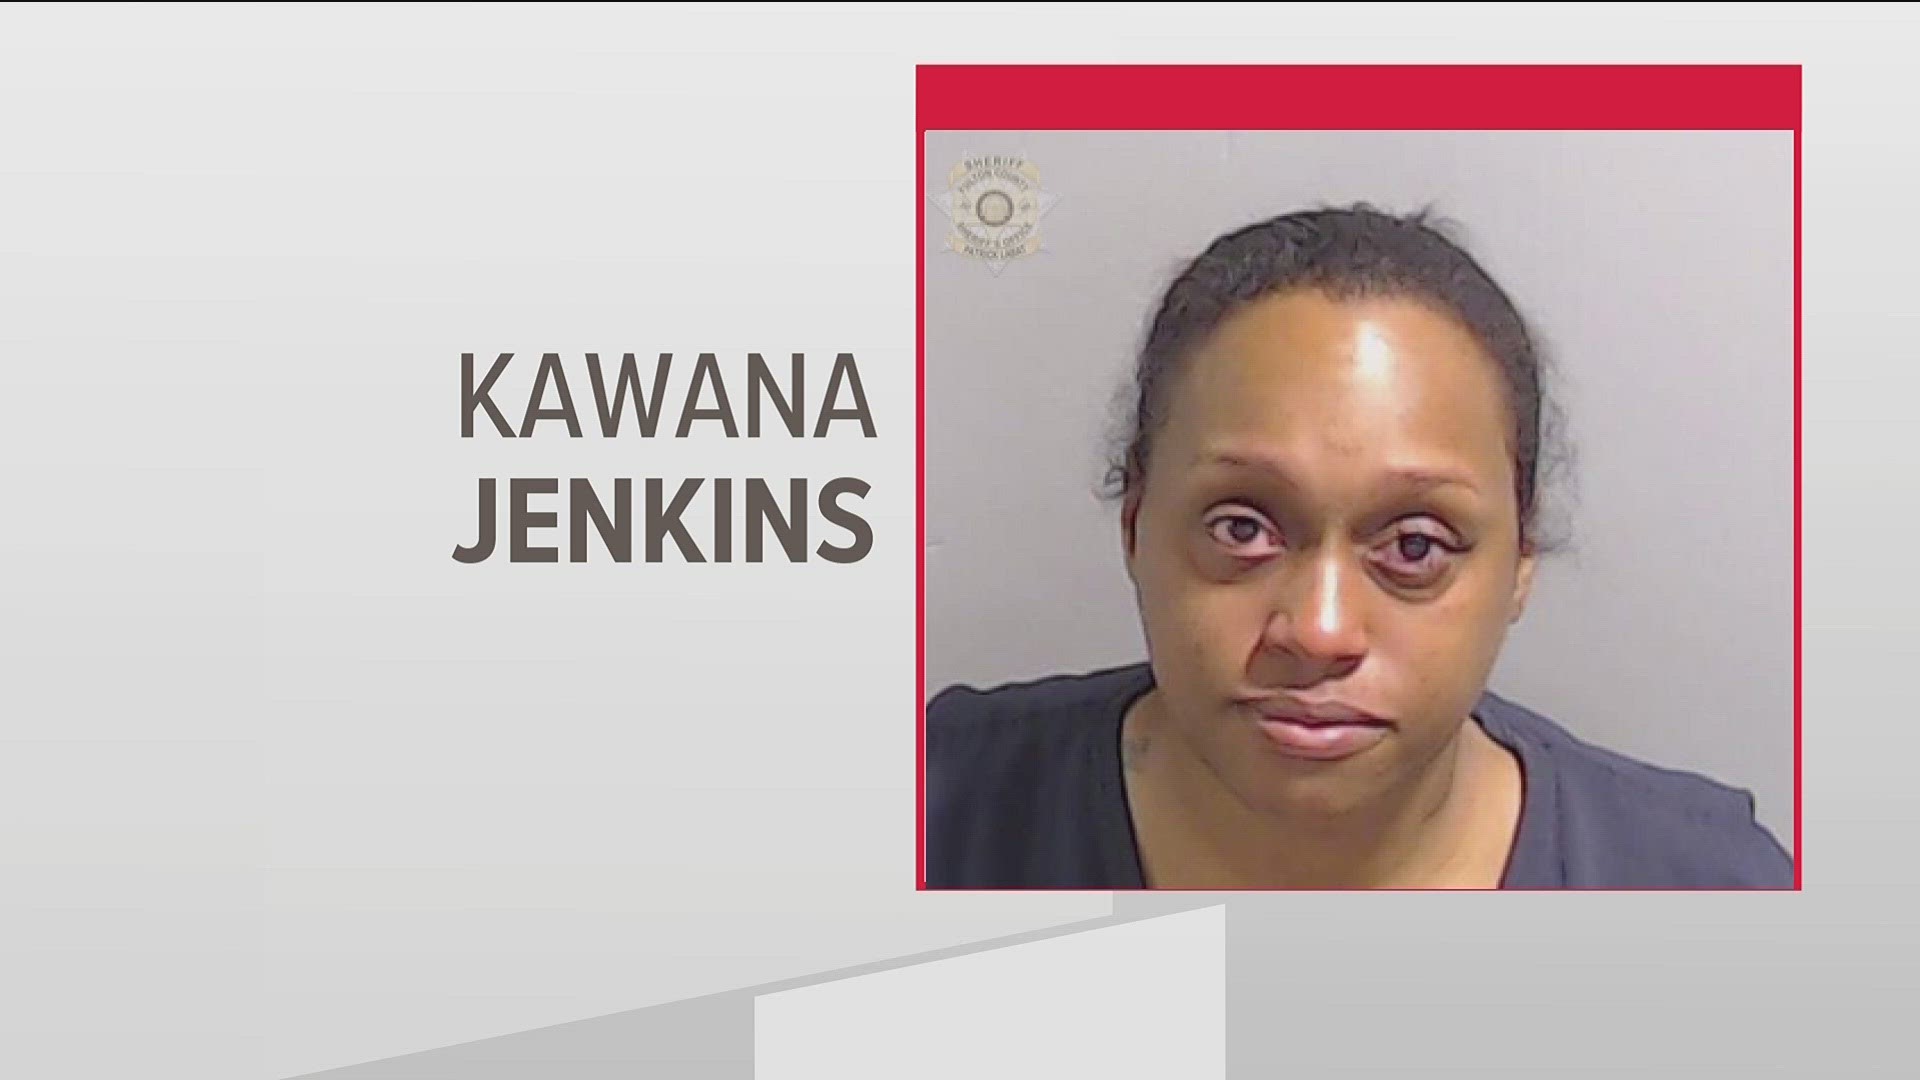 Kawana Jenkins was terminated and later arrested for after she was believed to have had an inappropriate relationship with an inmate.